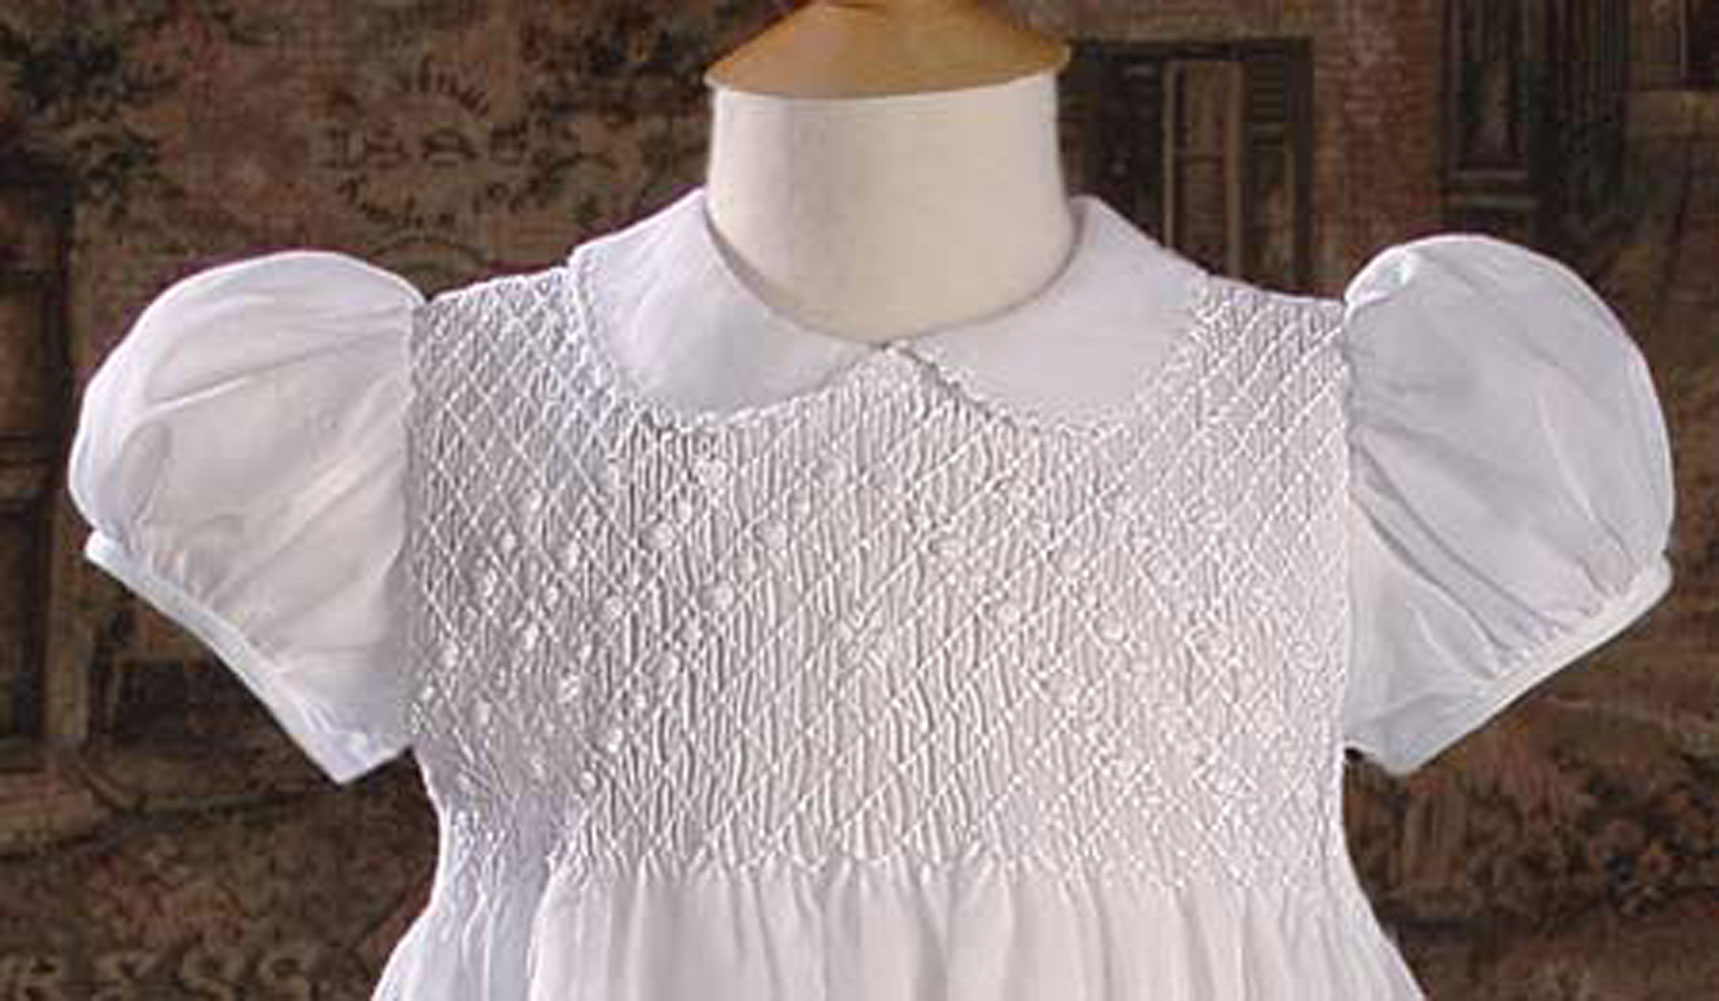 Girls White 32" Hand Smocked Polycotton Batiste Christening Baptism Gown - Little Things Mean a Lot